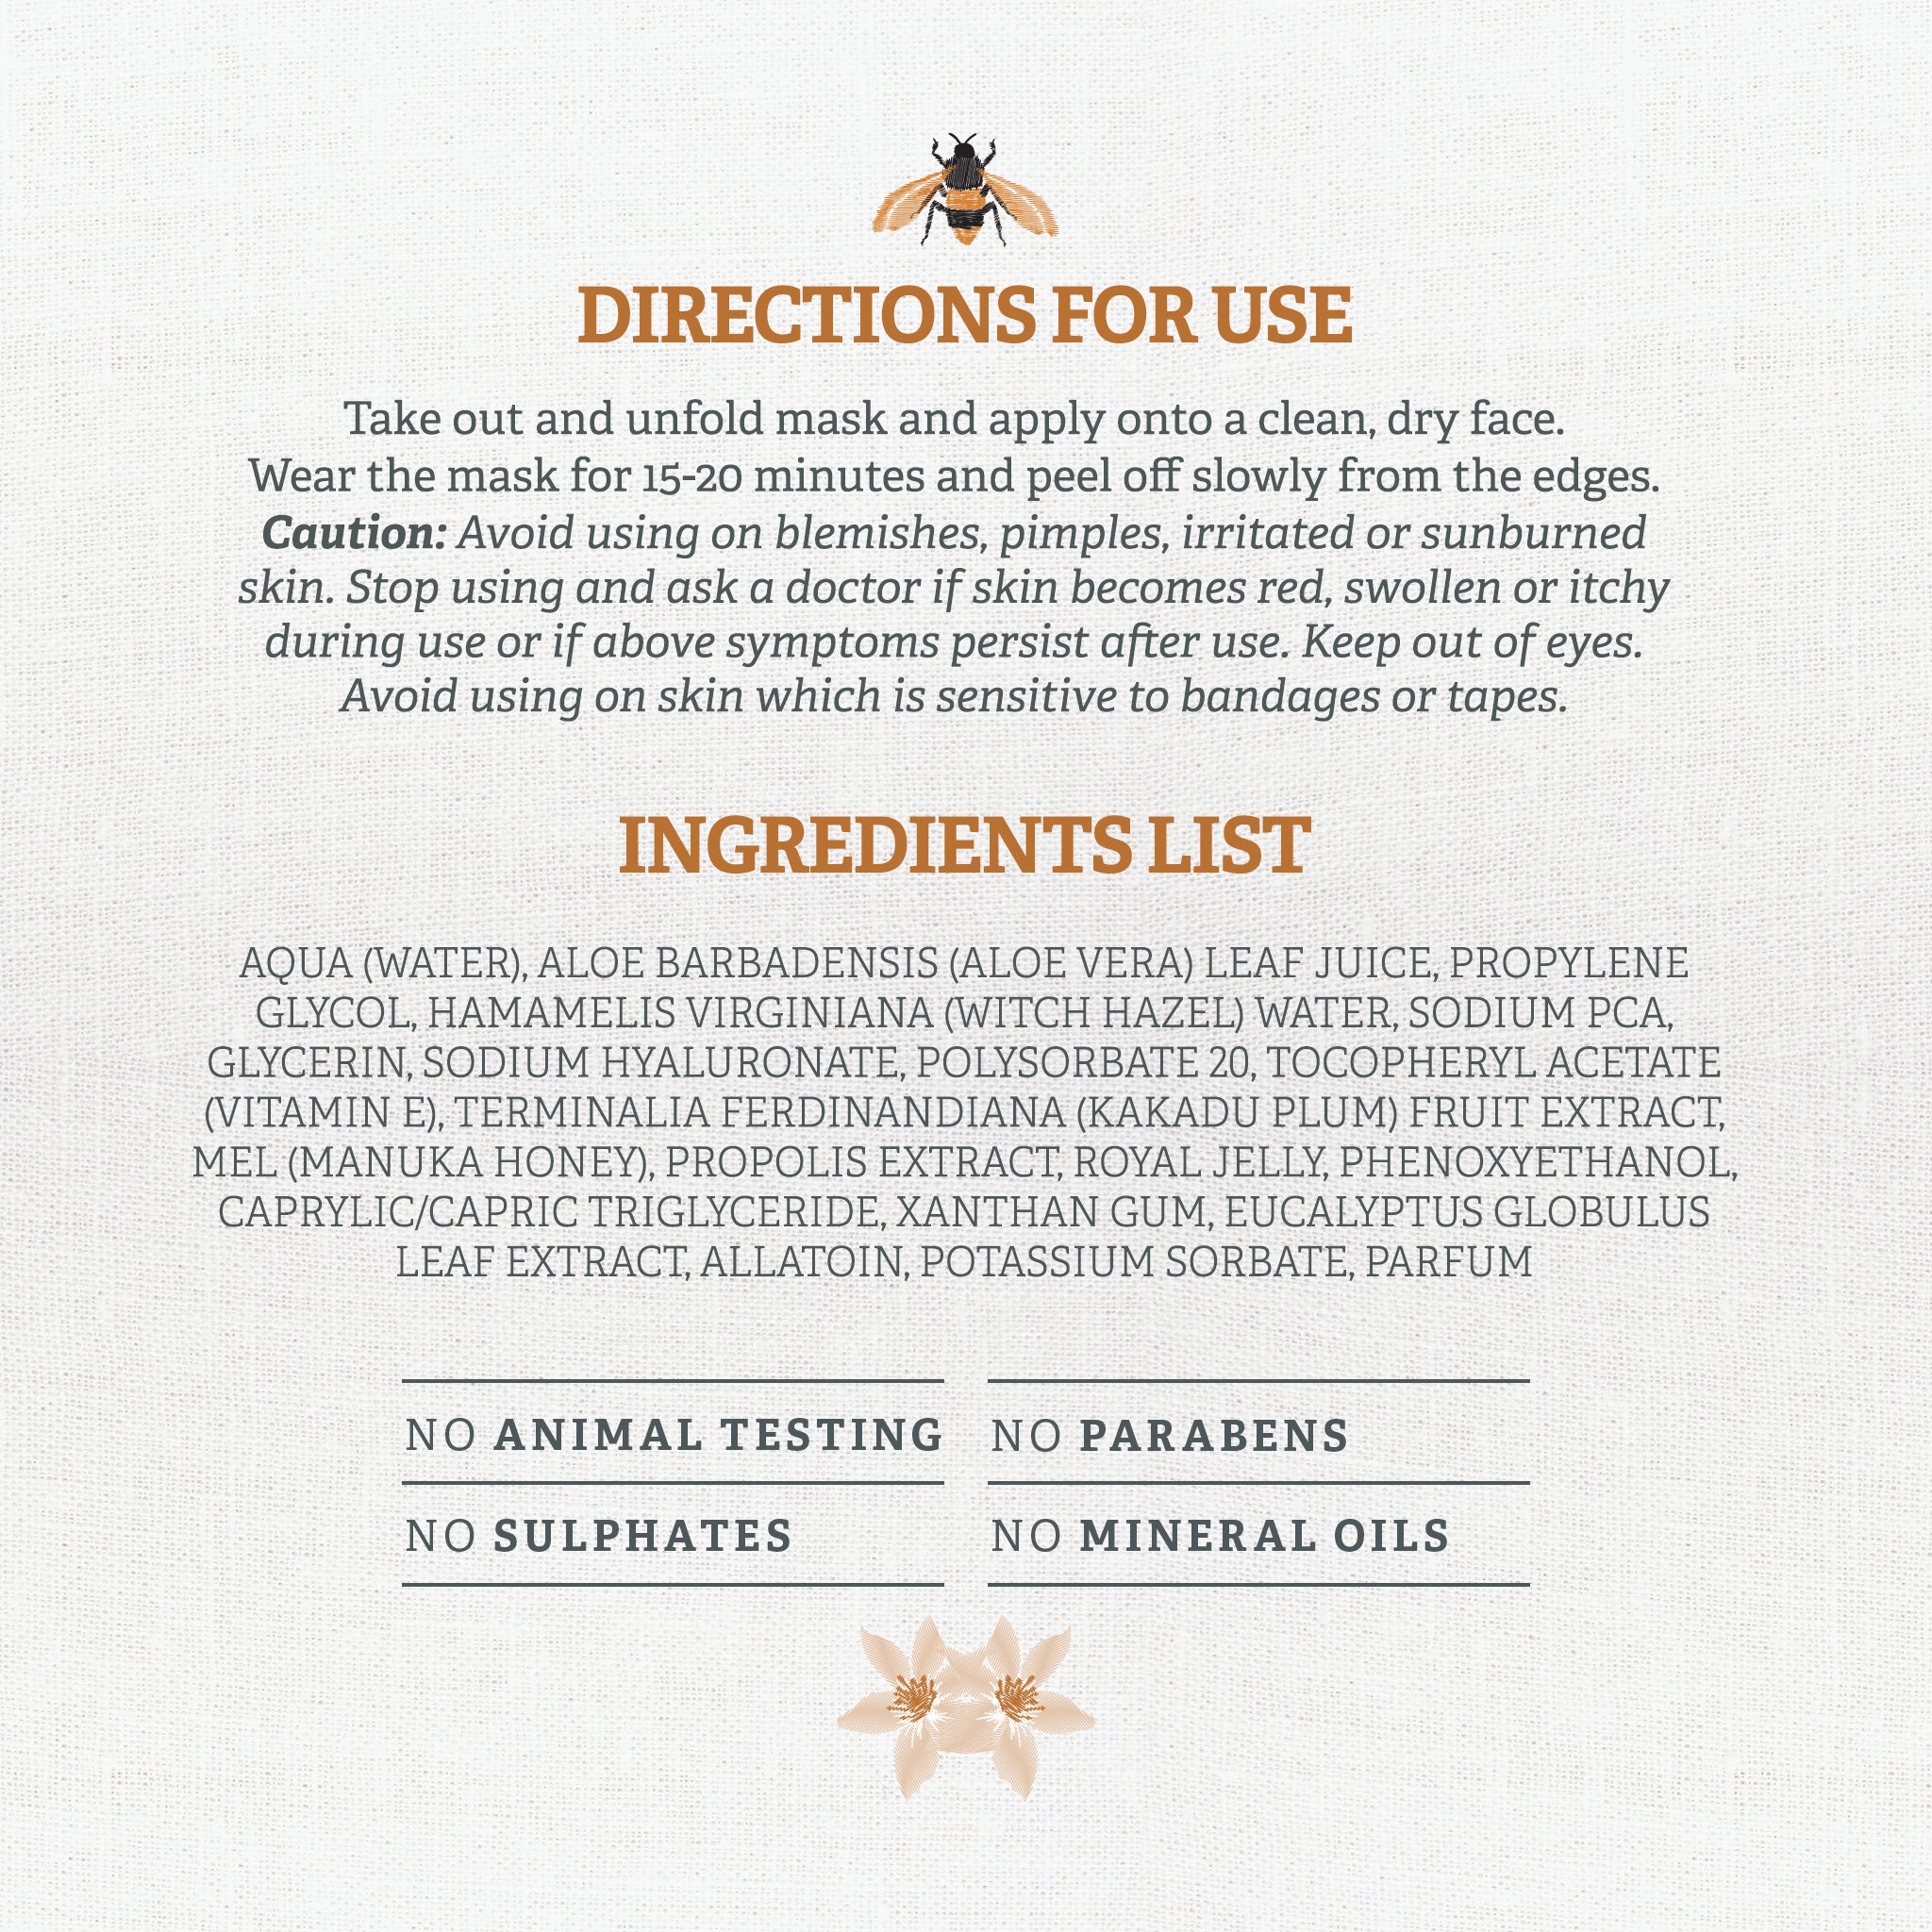 Wild Bee by Natural Life Illuminating Face Mask 5 Pack - directions for use and ingredients list